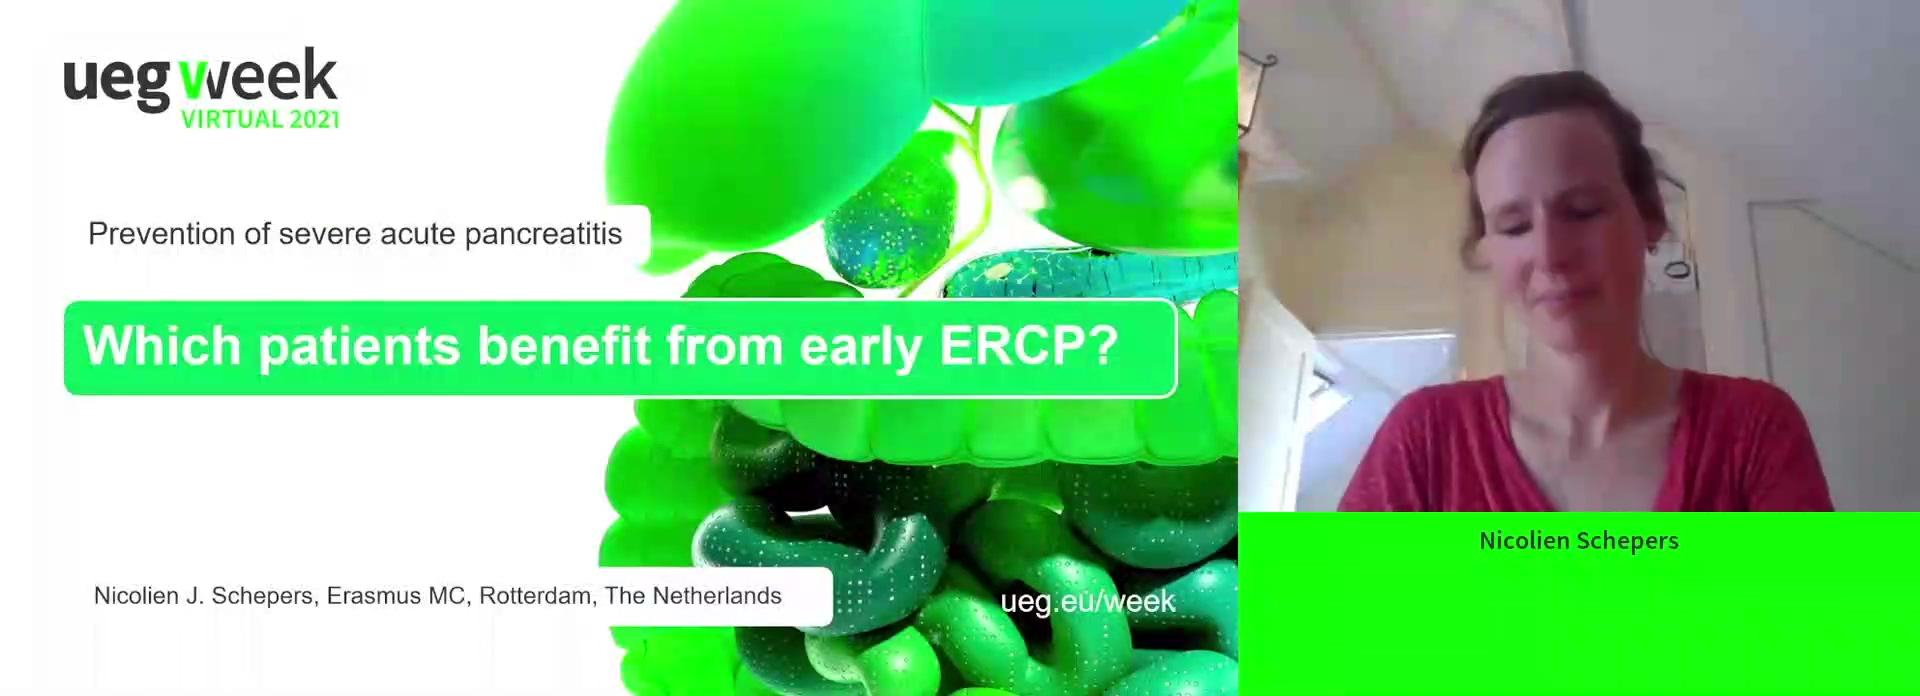 Which patients benefit from early ERCP?